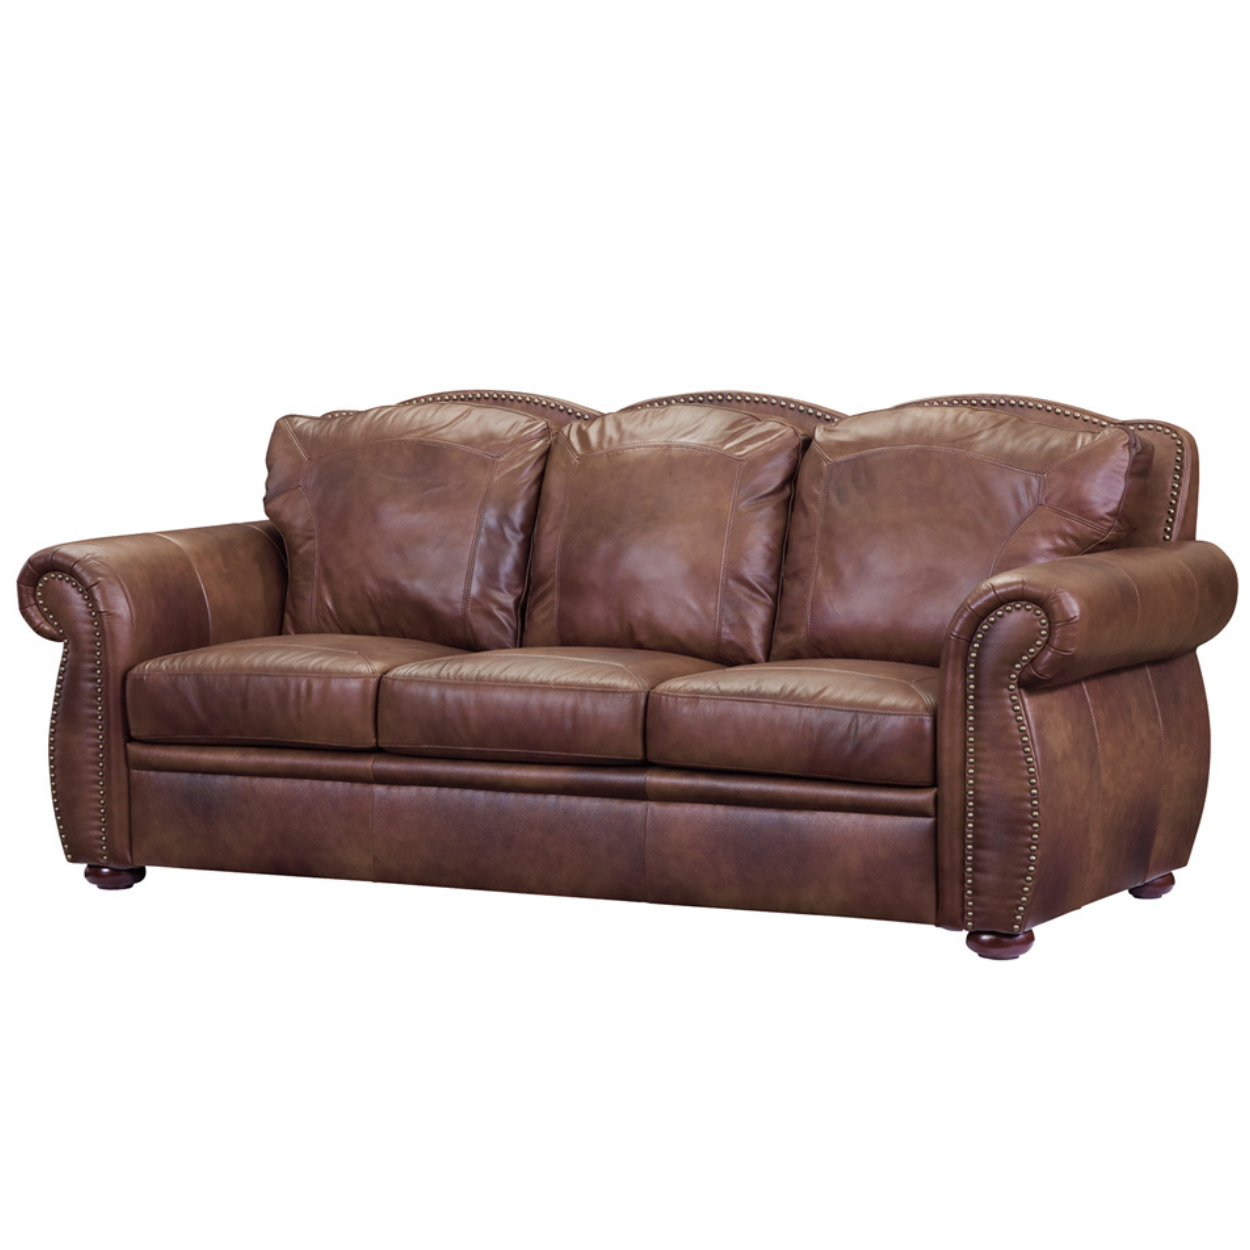 Scottsdale Leather Rolled Arm Sofa